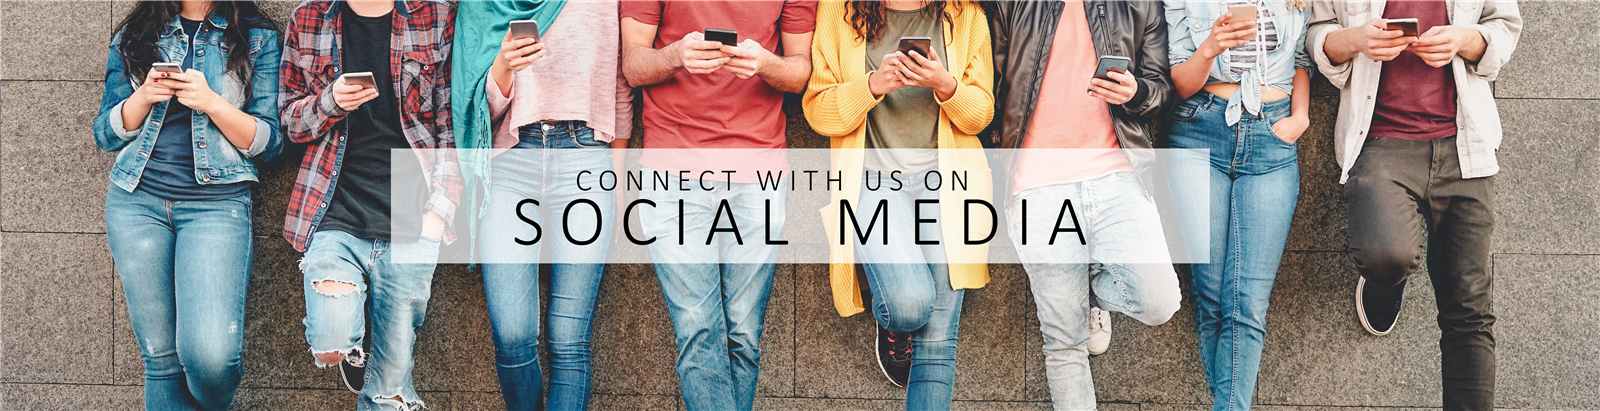 Connect with us on Social Media 